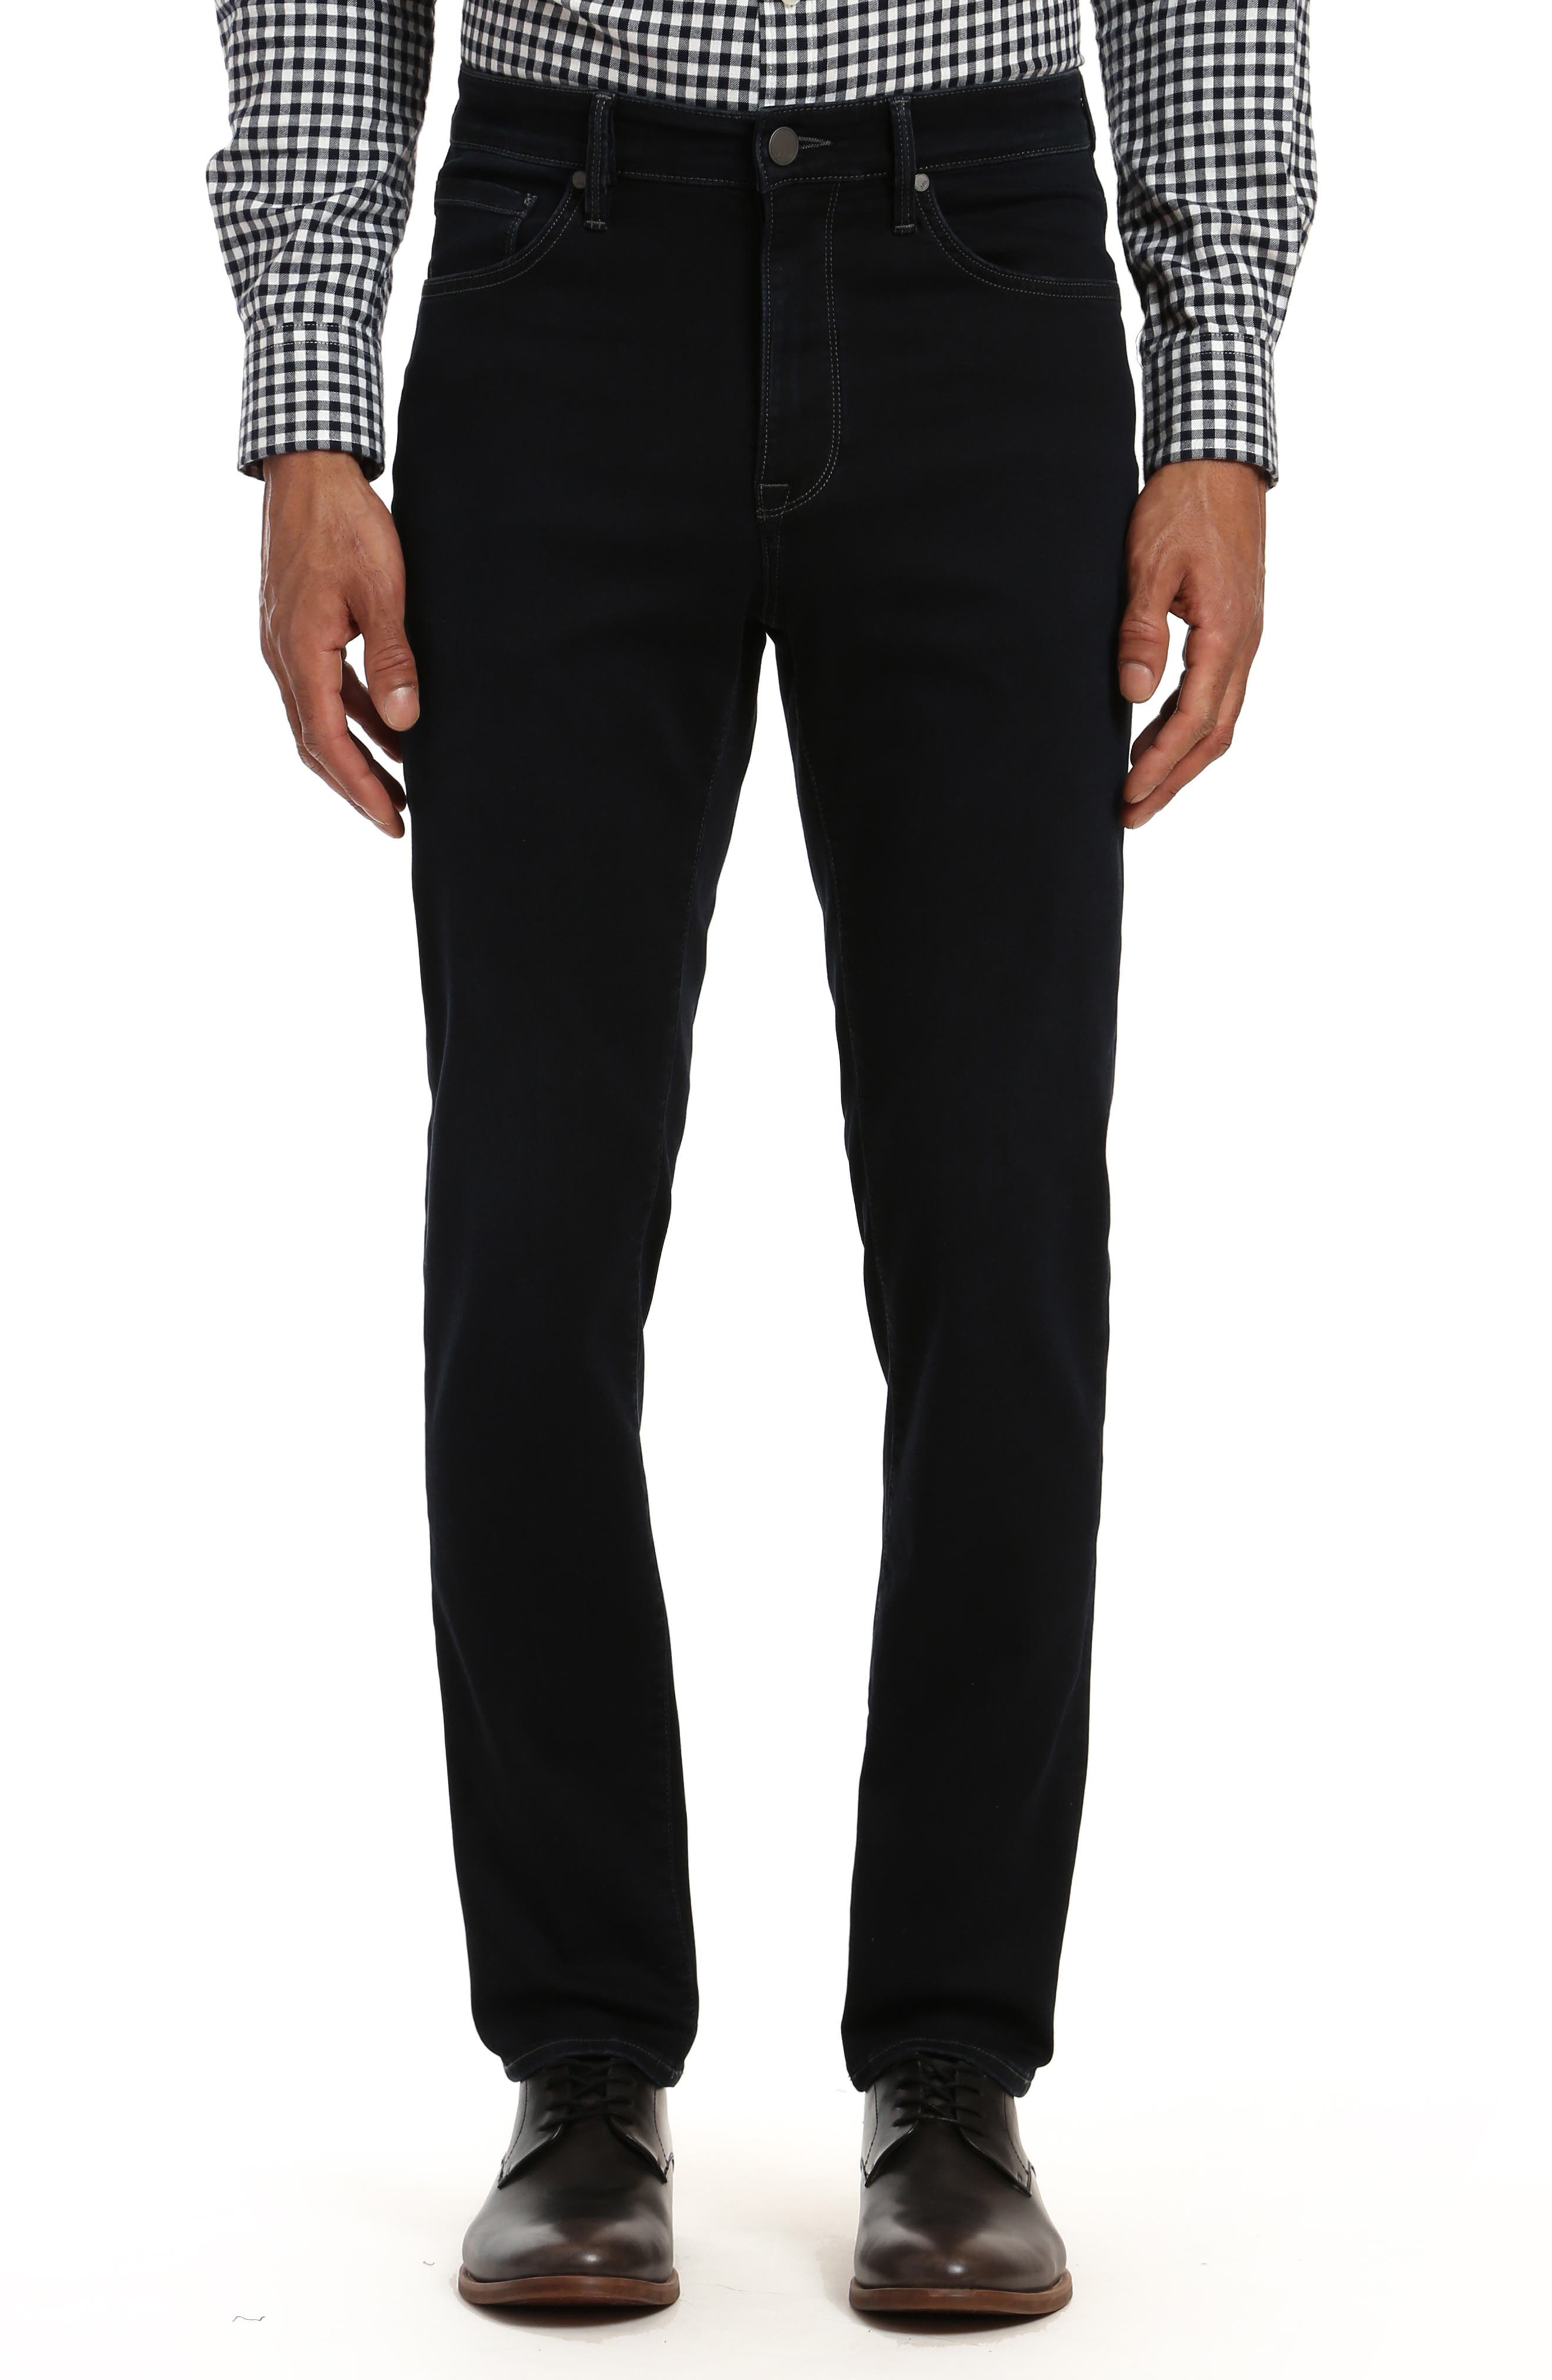 34 Heritage Champ Athletic Fit Jeans in Midnight Austin at Nordstrom,